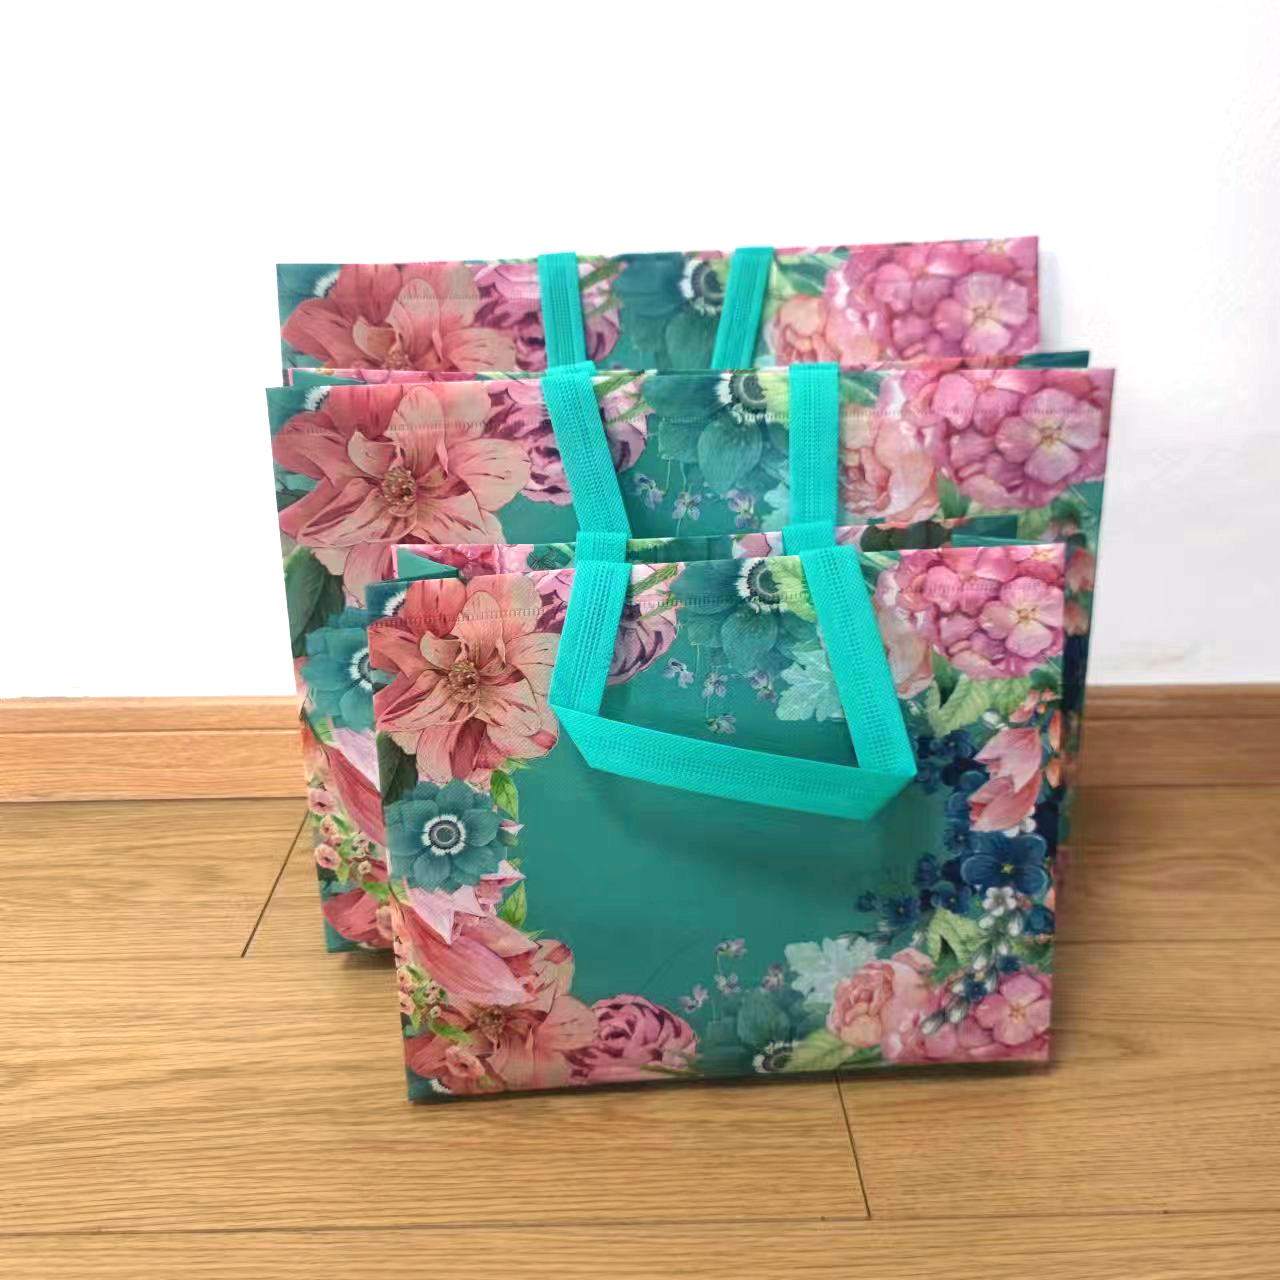 Green Flowers Film Non-Woven Fabric Clothing Store Bag Collect Clothes Handbag Shopping Gift Bag Packing Bag